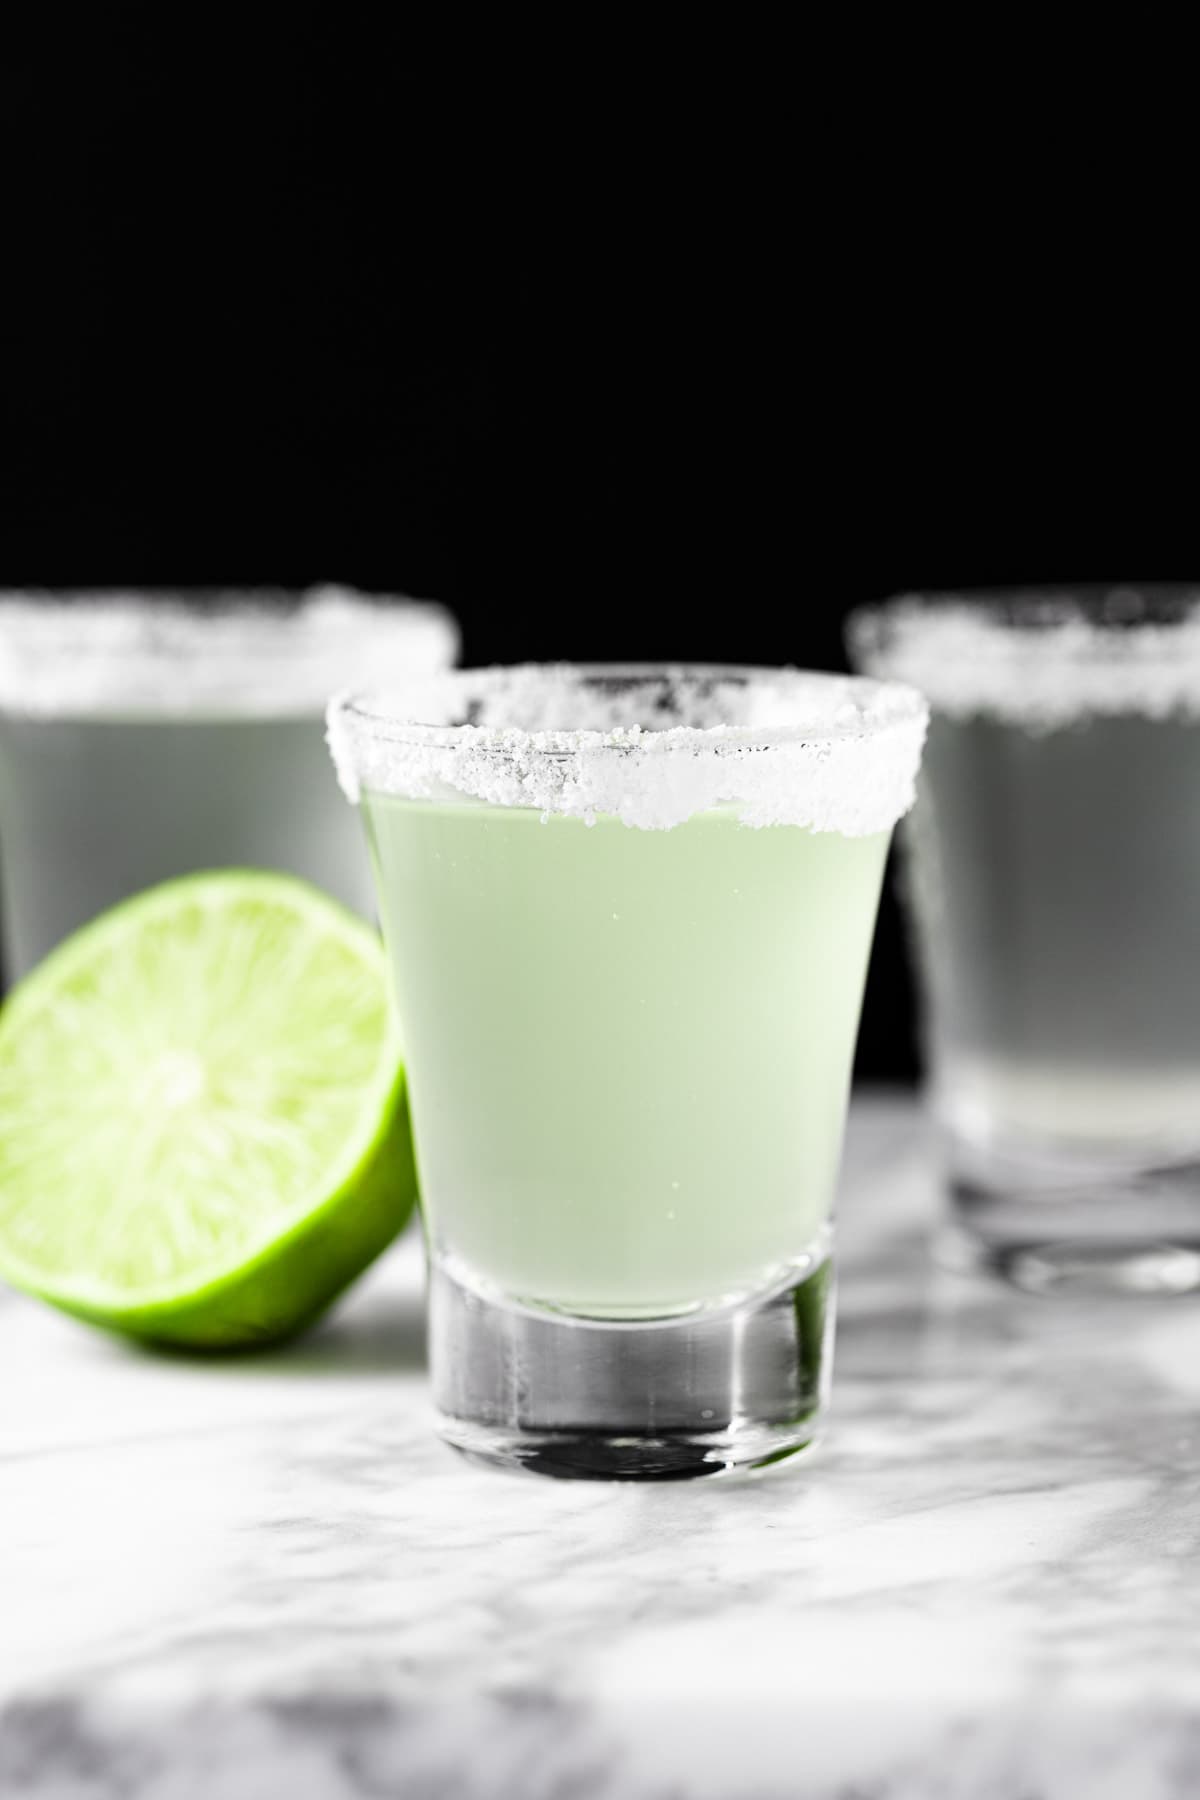 Three margarita shooters with a salted rim, next to half a lime.